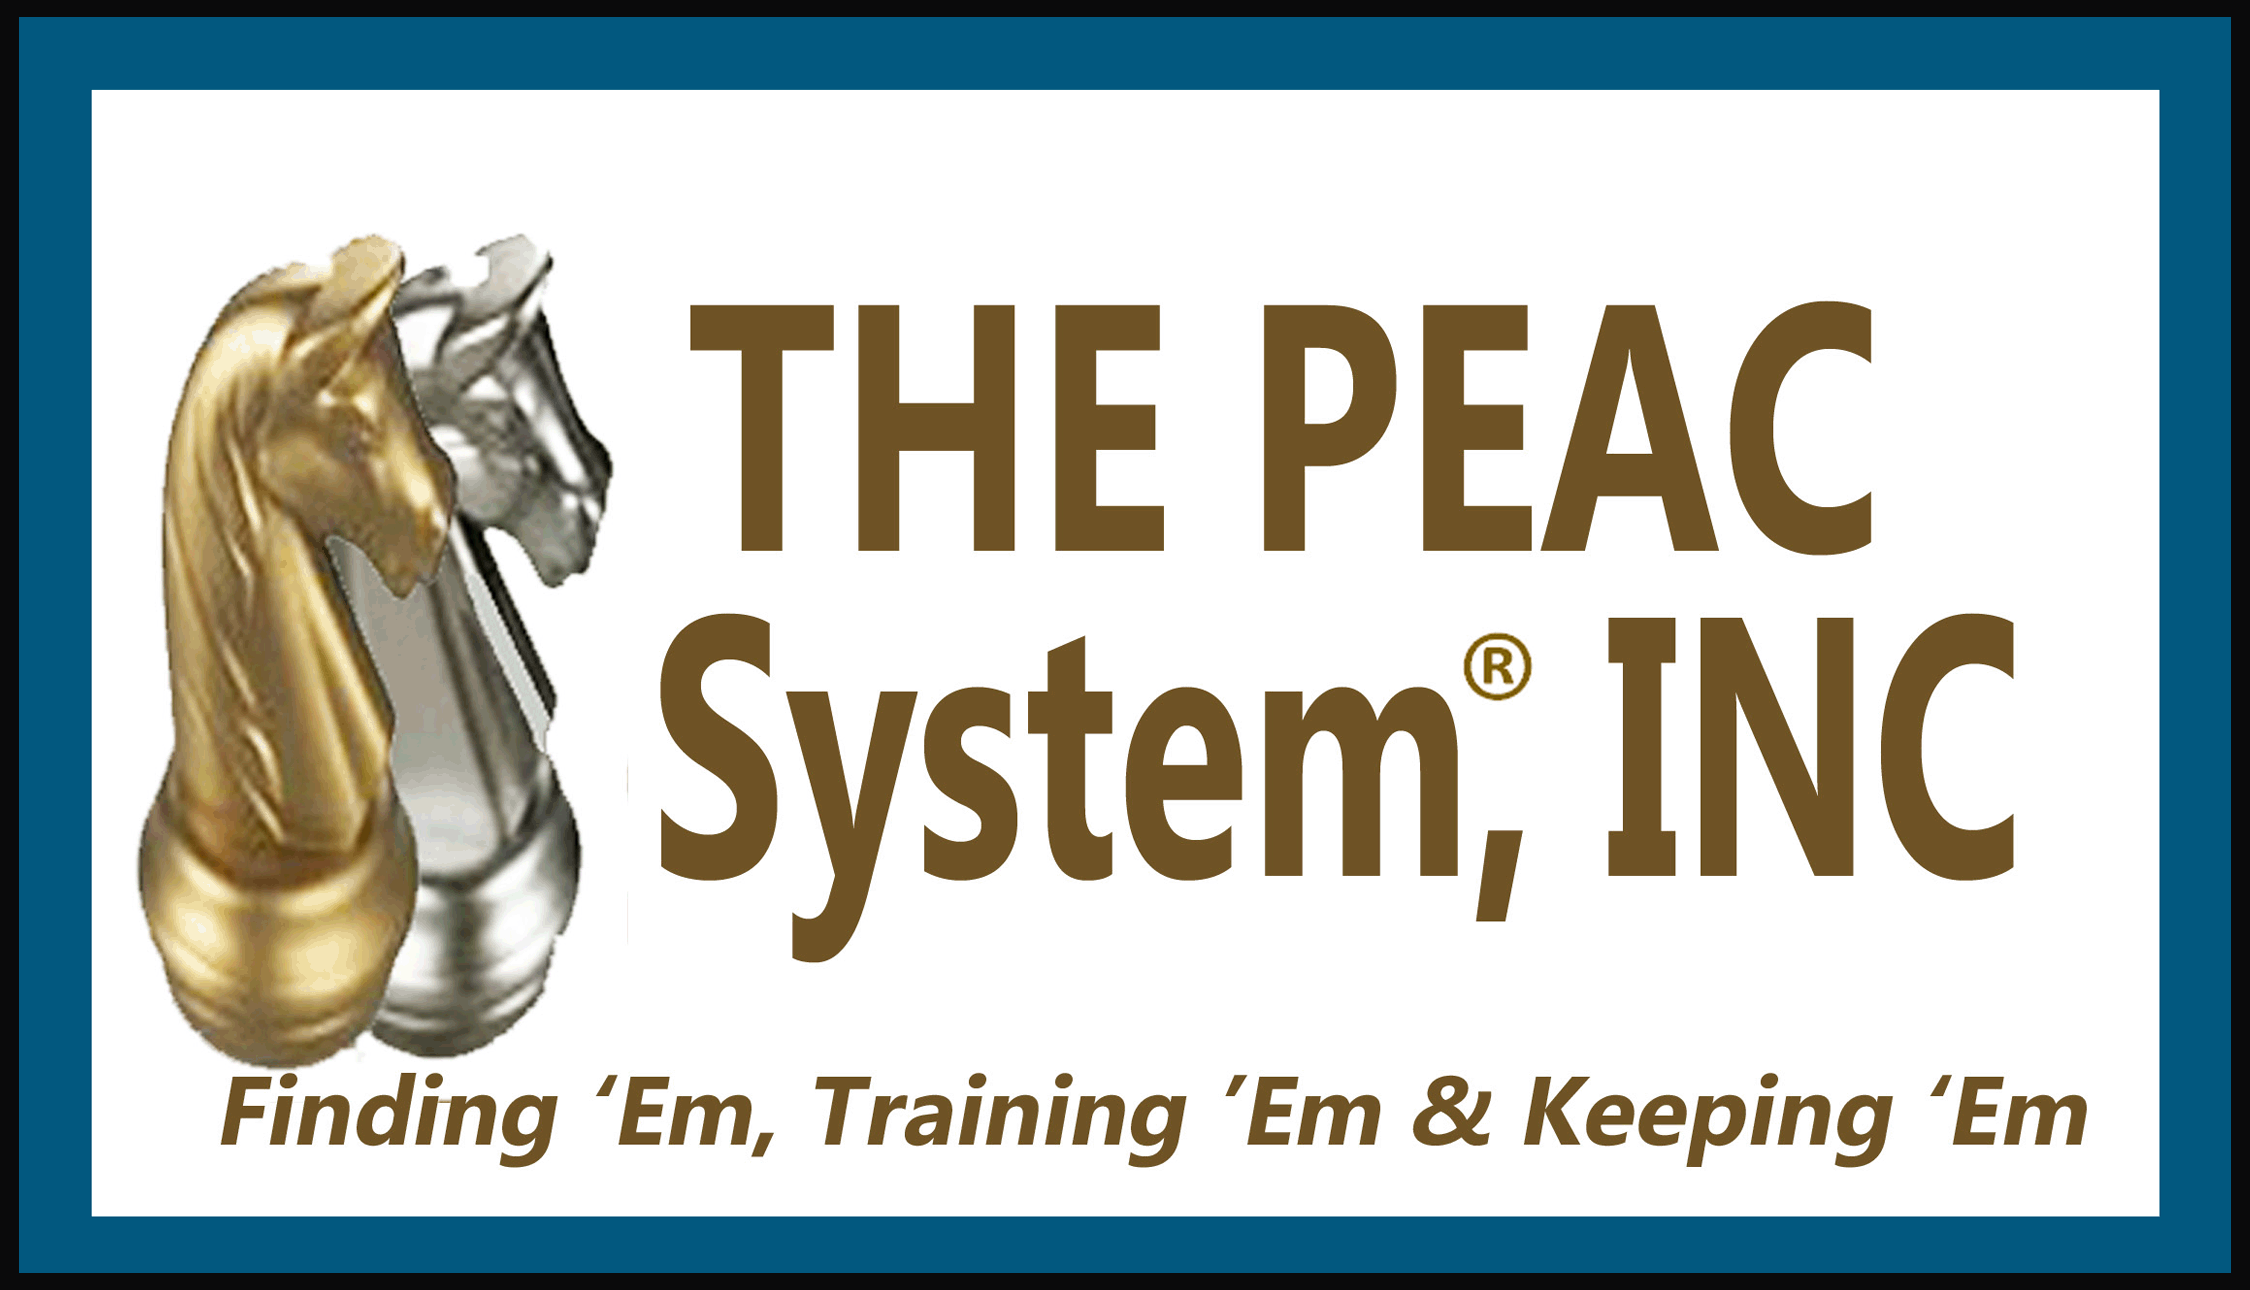 The Peac System, Inc